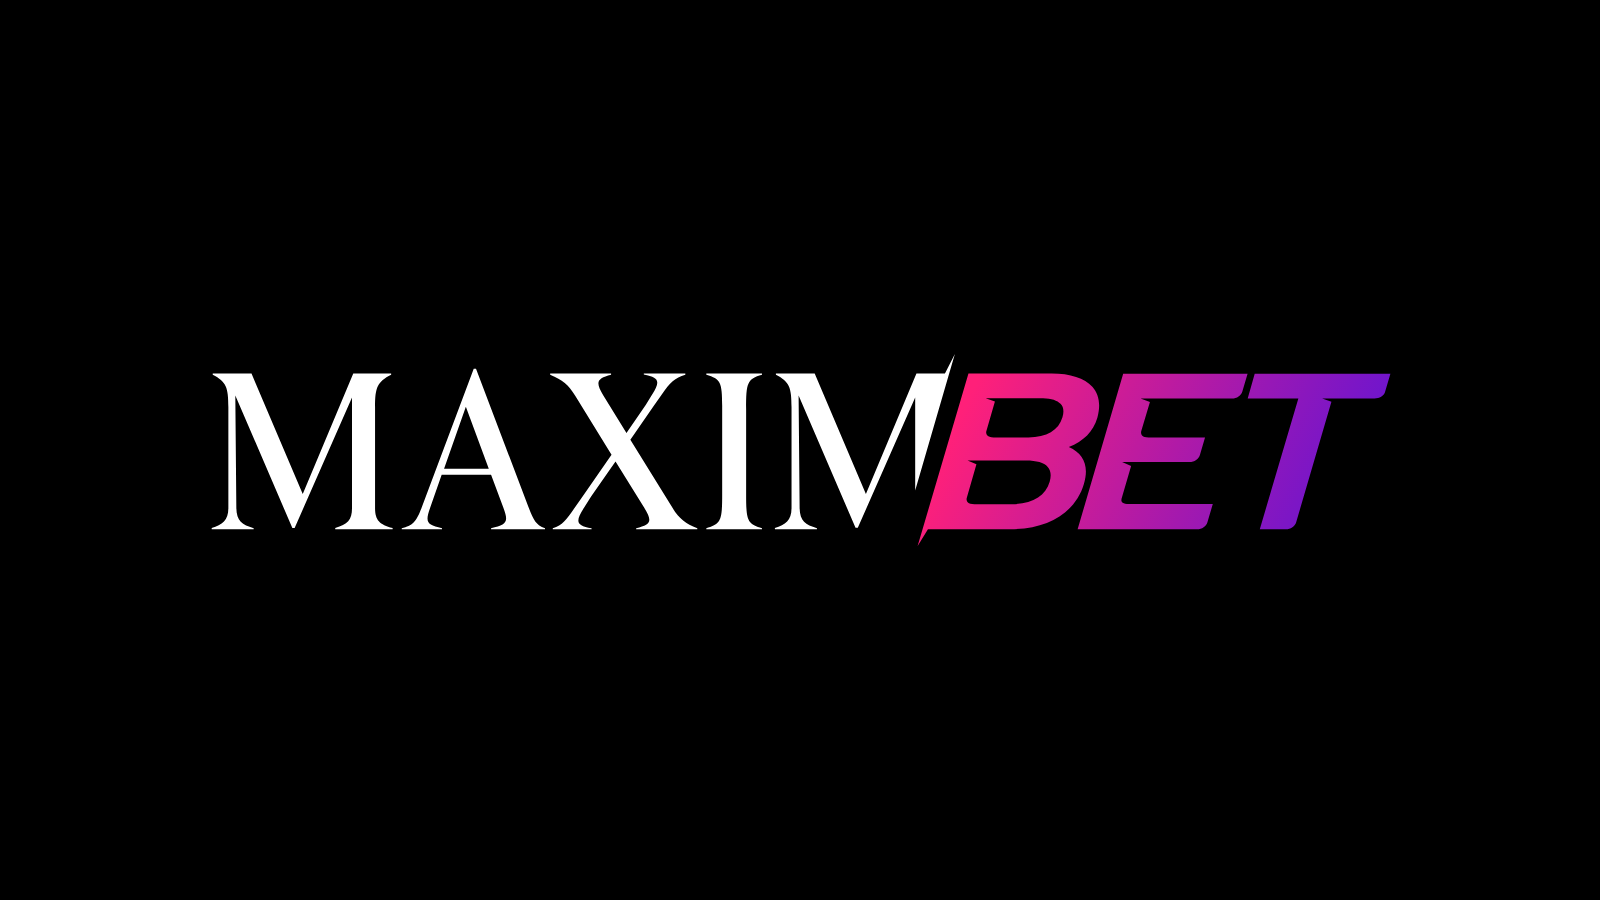 MaximBet Selects Global Payments’ iGaming Solutions to Bring Simple, Secure Payments to Online Sports Betting